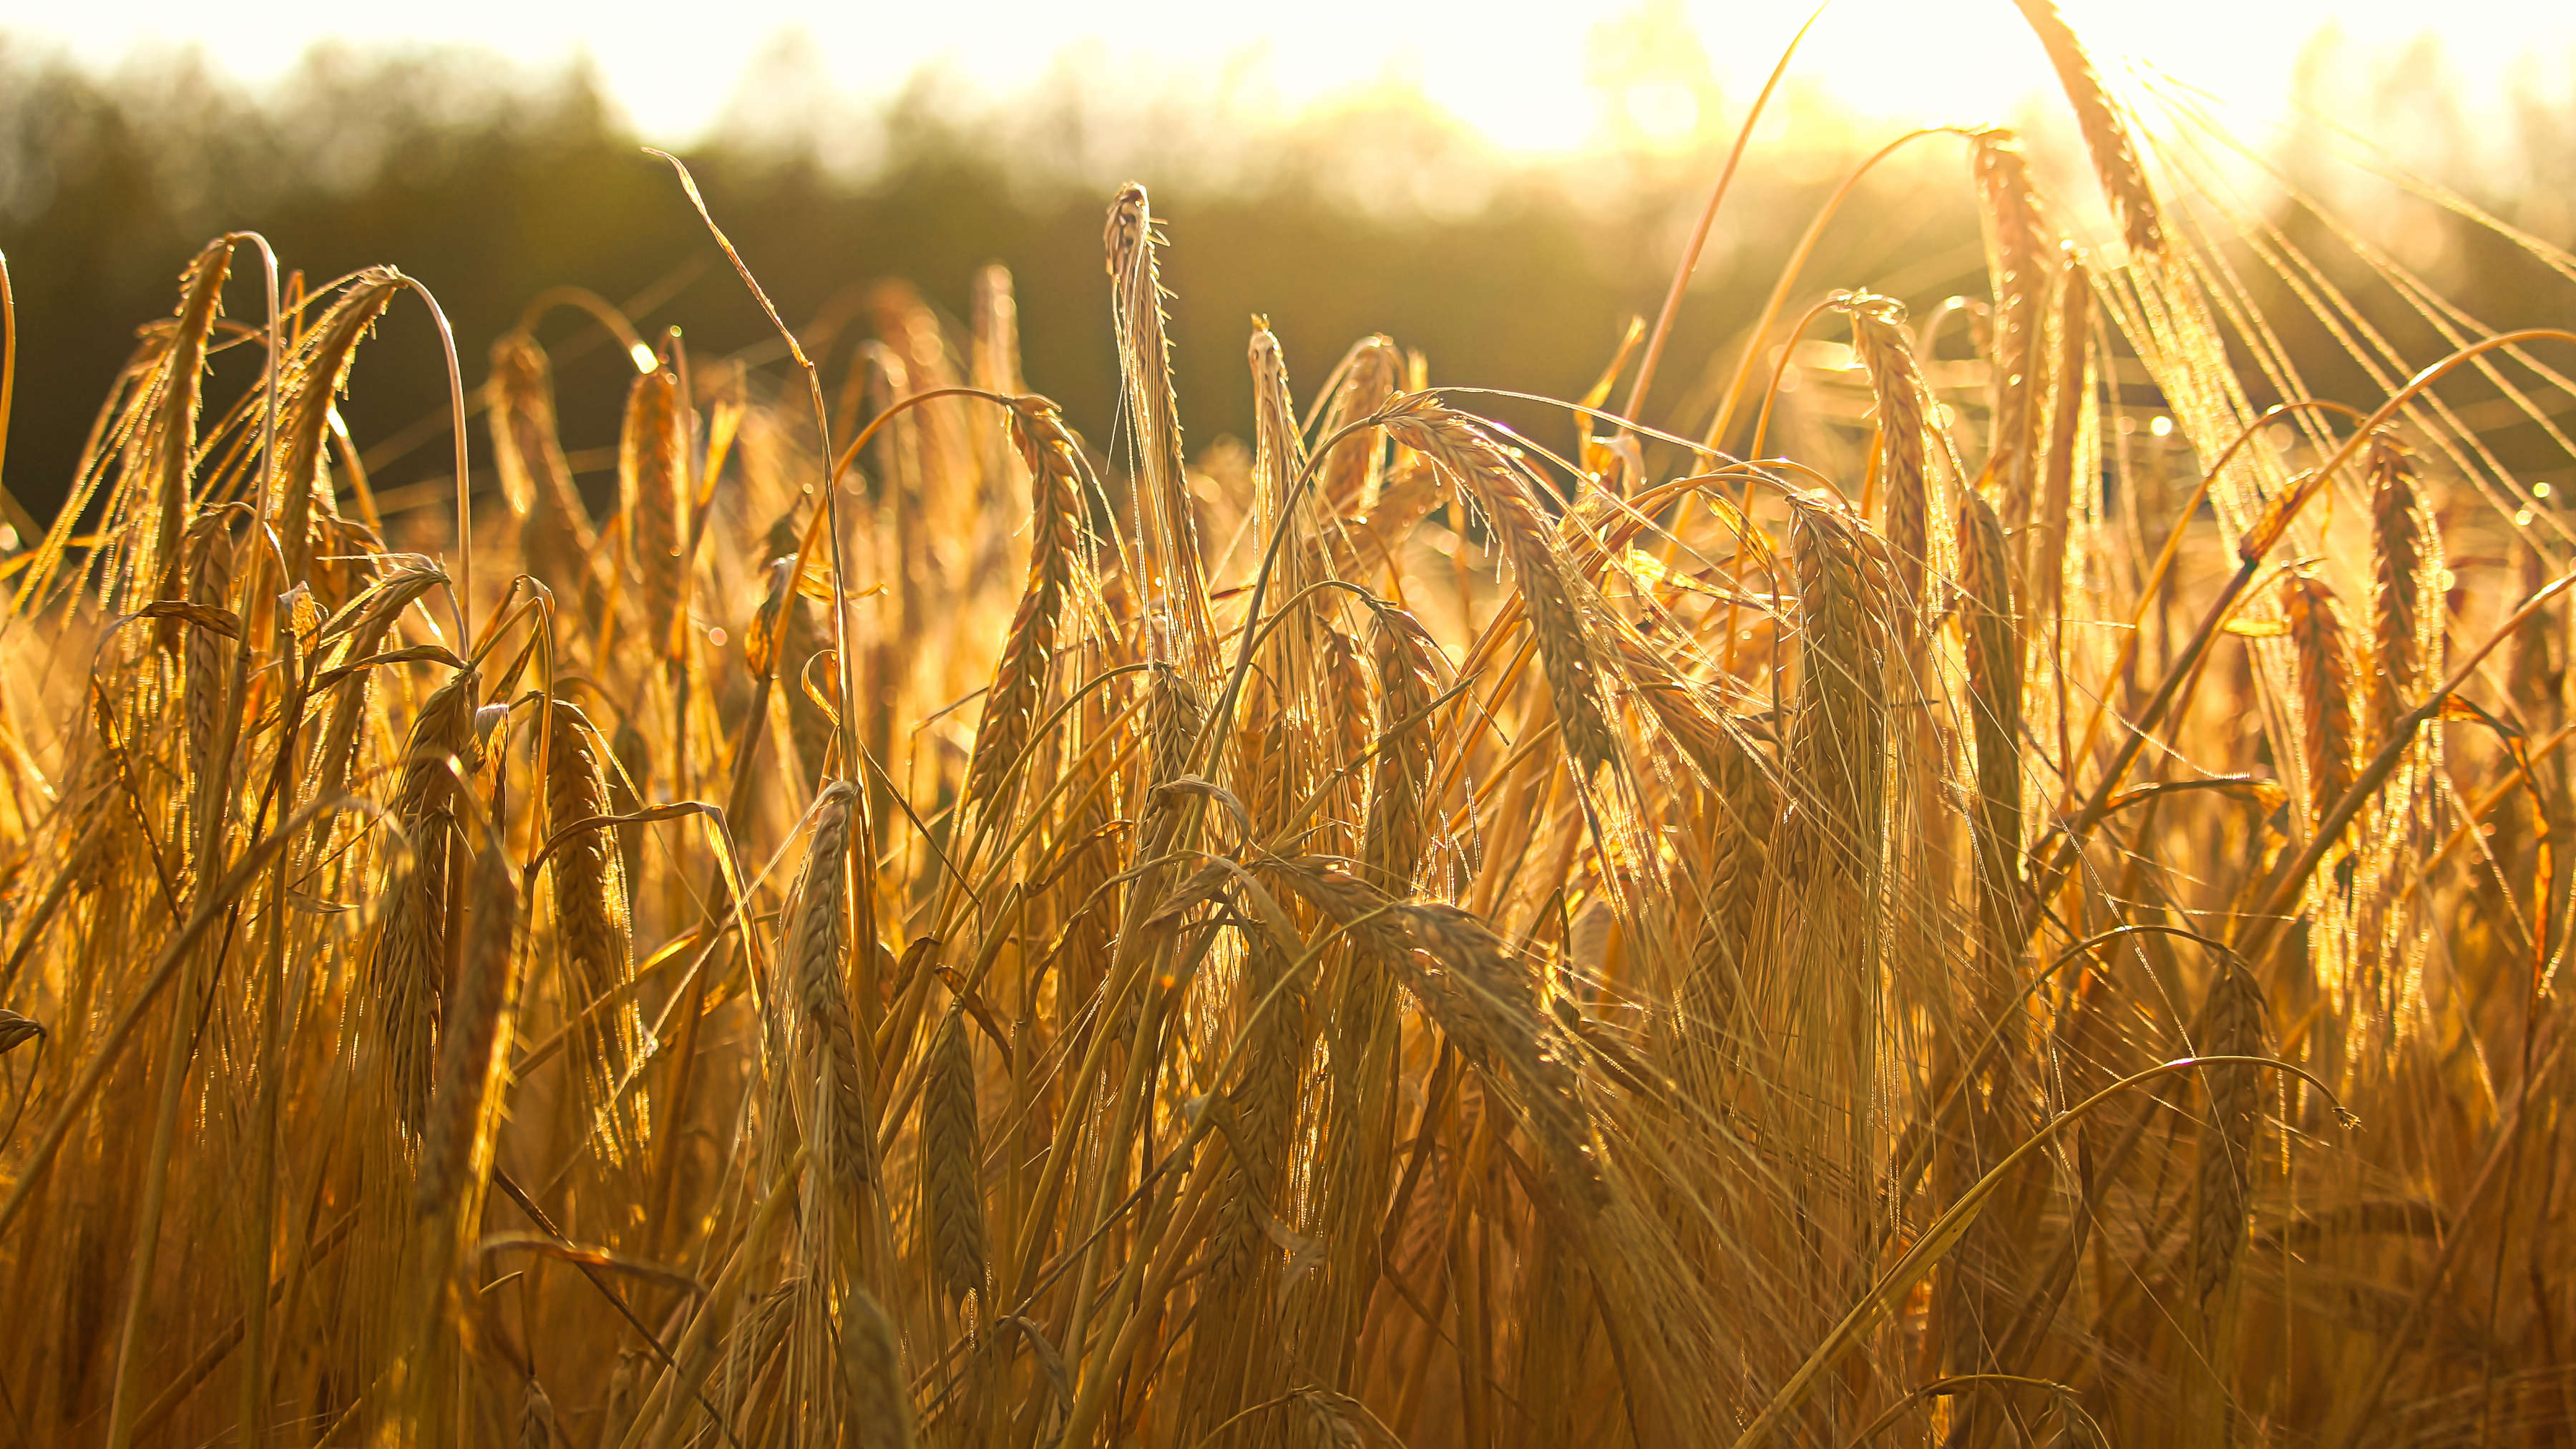 Dried yellow barley stalks with their seed heads drooping stand in the glowing sunlight. Photo: Akchamczuk / iStock.